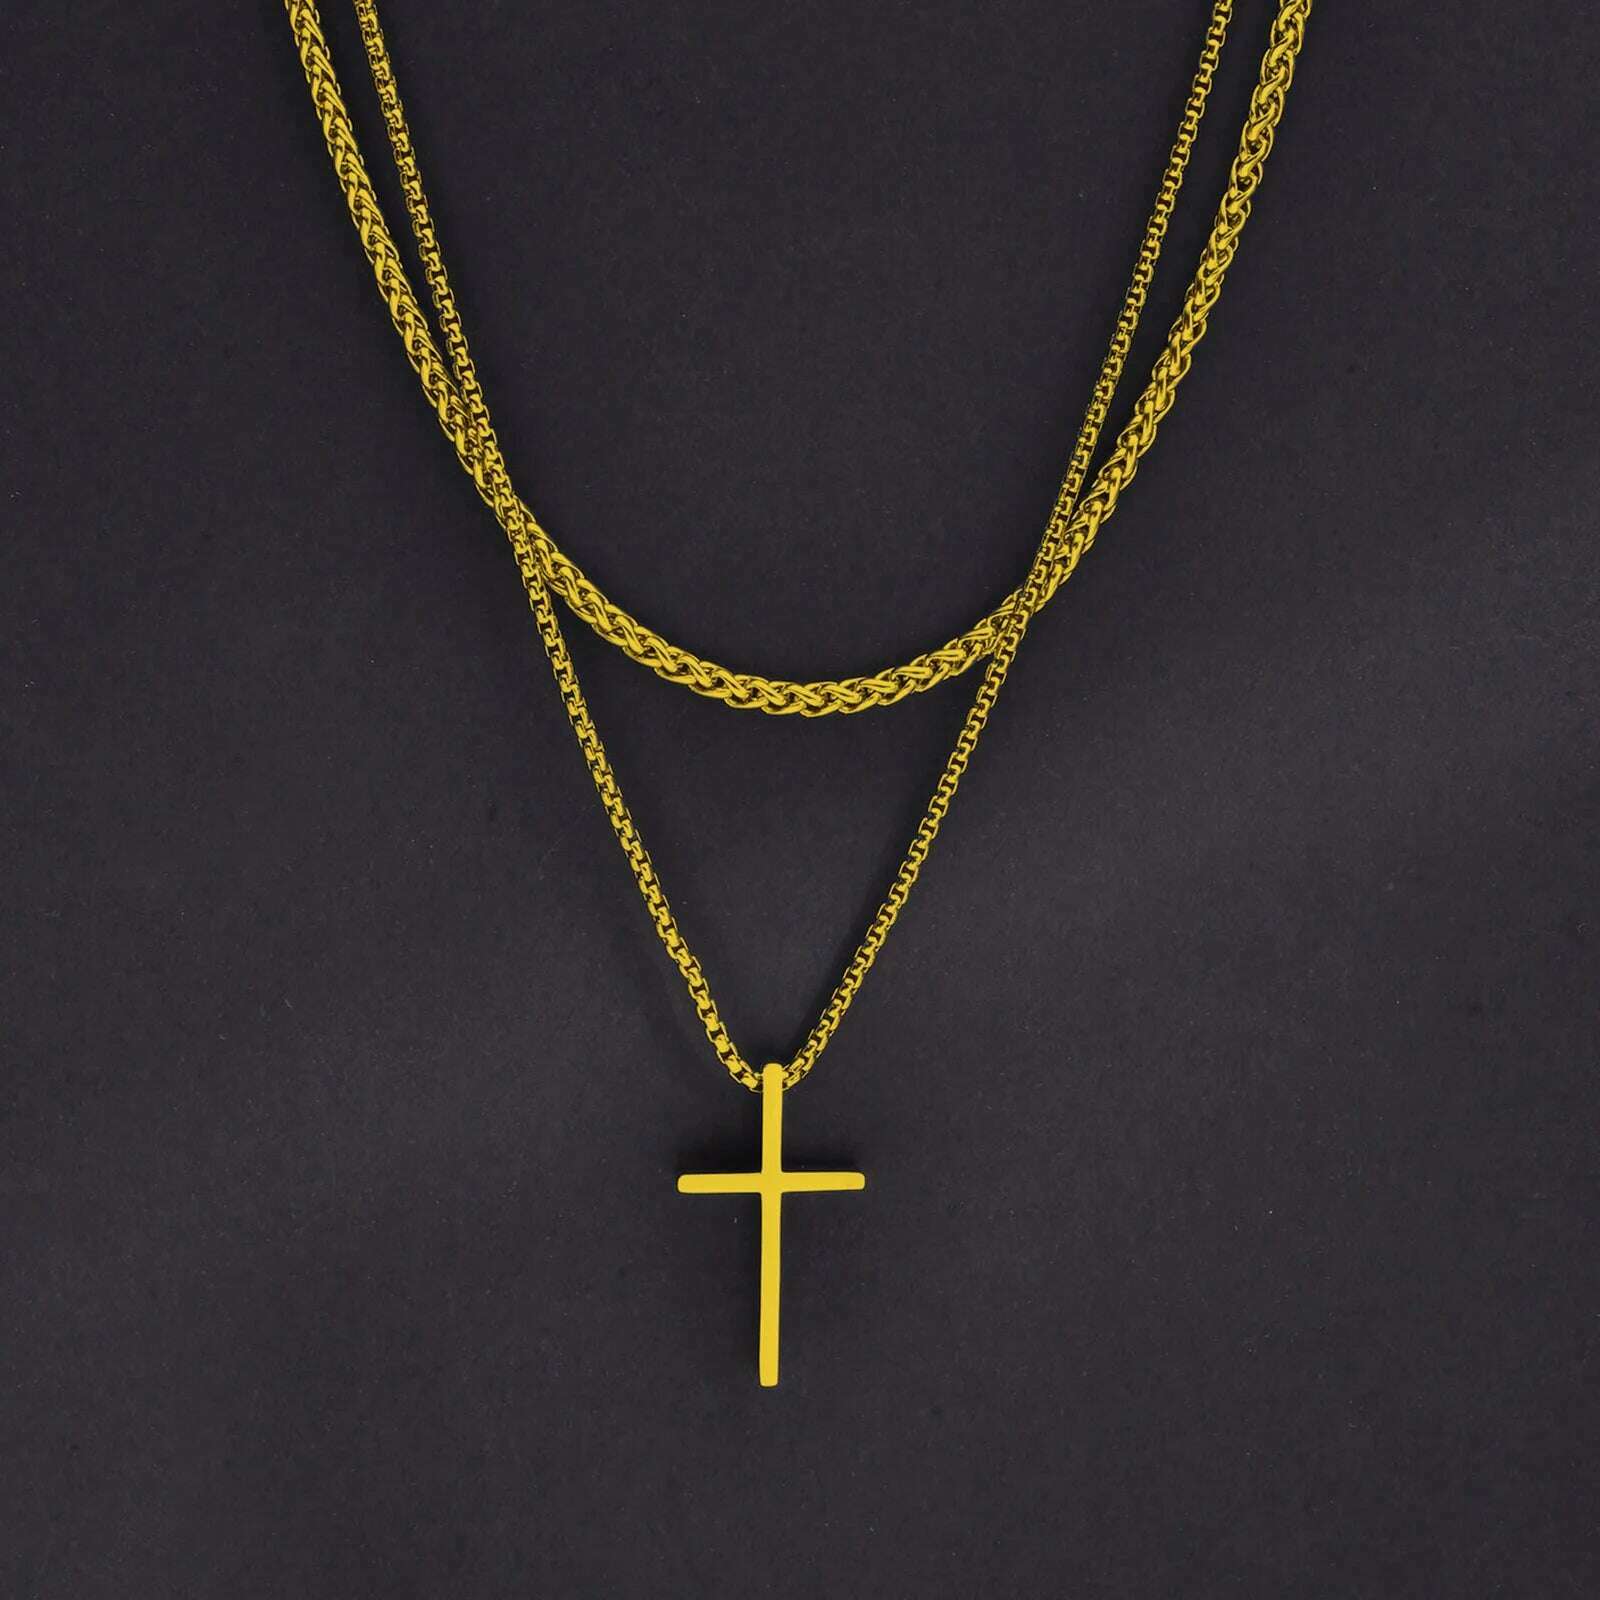 KIMLUD, Vnox Mens Cross Necklaces, Stainless Steel Layered Plain Cross Pendant, Rope Box Chain Necklace, Simple Prayer Jesus Collar, NC-1035G NC-104-50G, KIMLUD Womens Clothes